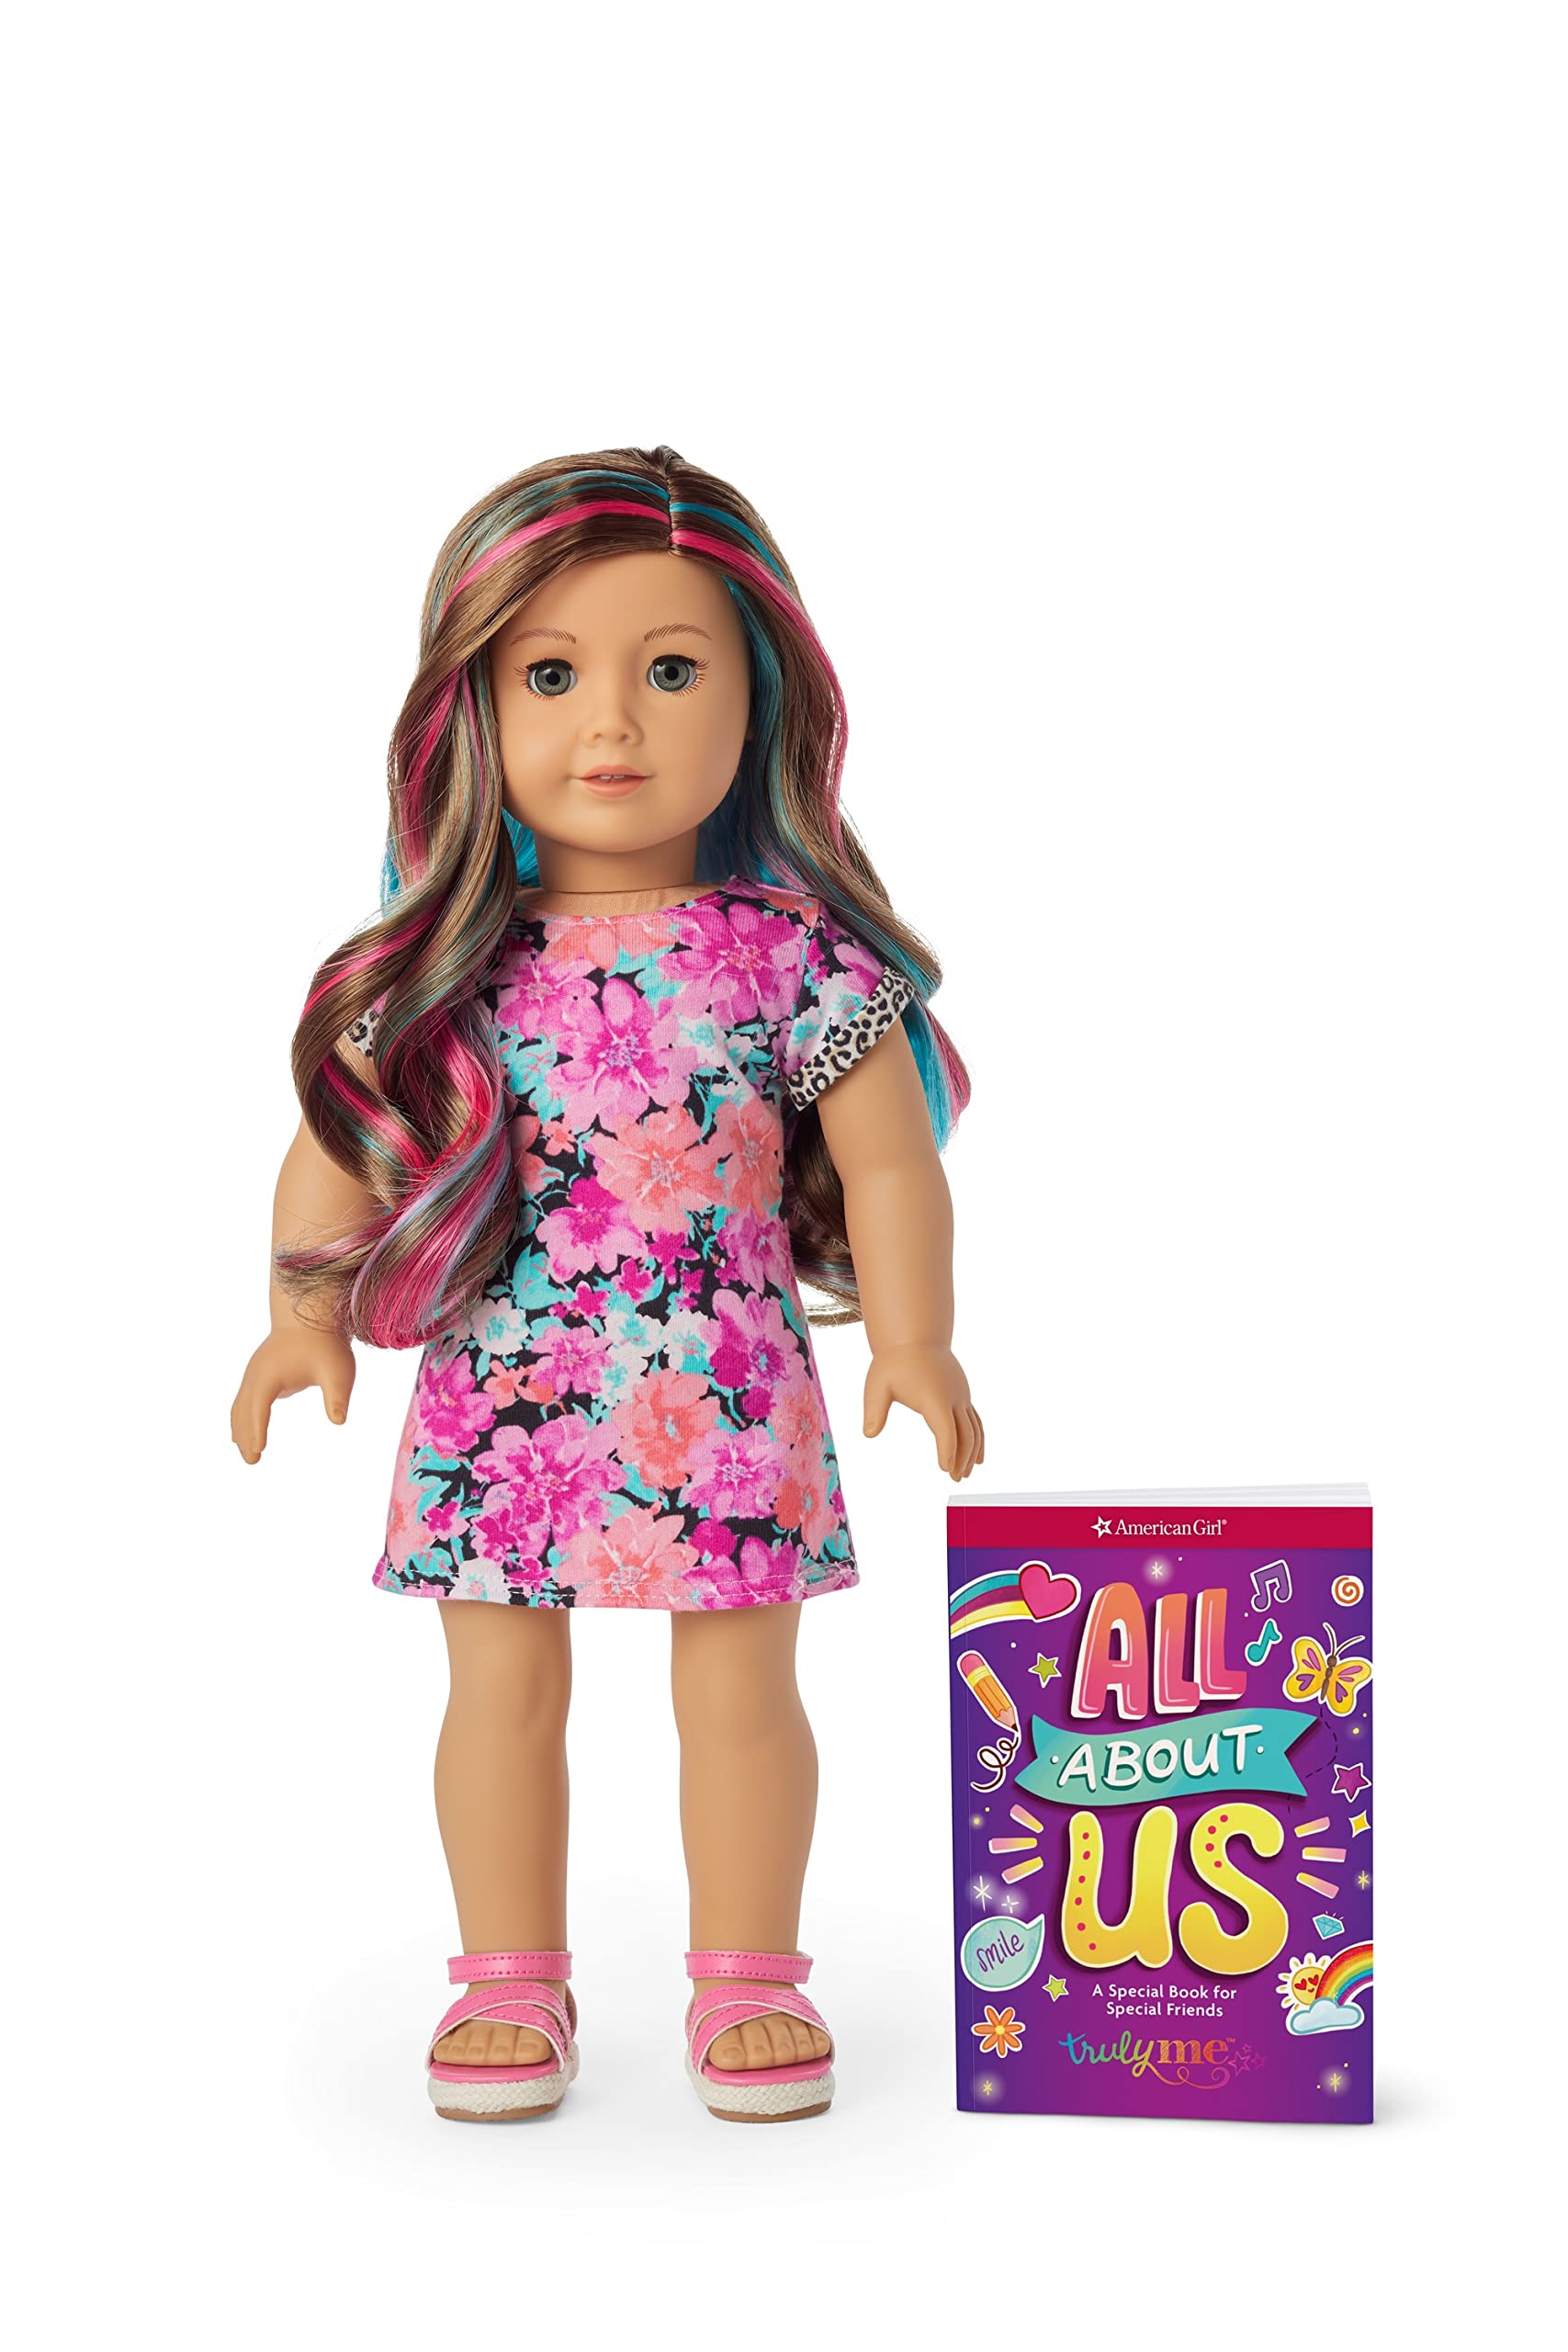 American Girl Truly Me 18-Inch Doll 101 with Gray Eyes, Wavy Caramel Hair with Pink and Blue Highlights, Light-to-Medium Skin with Warm Undertones, Floral Printed T-Shirt Dress